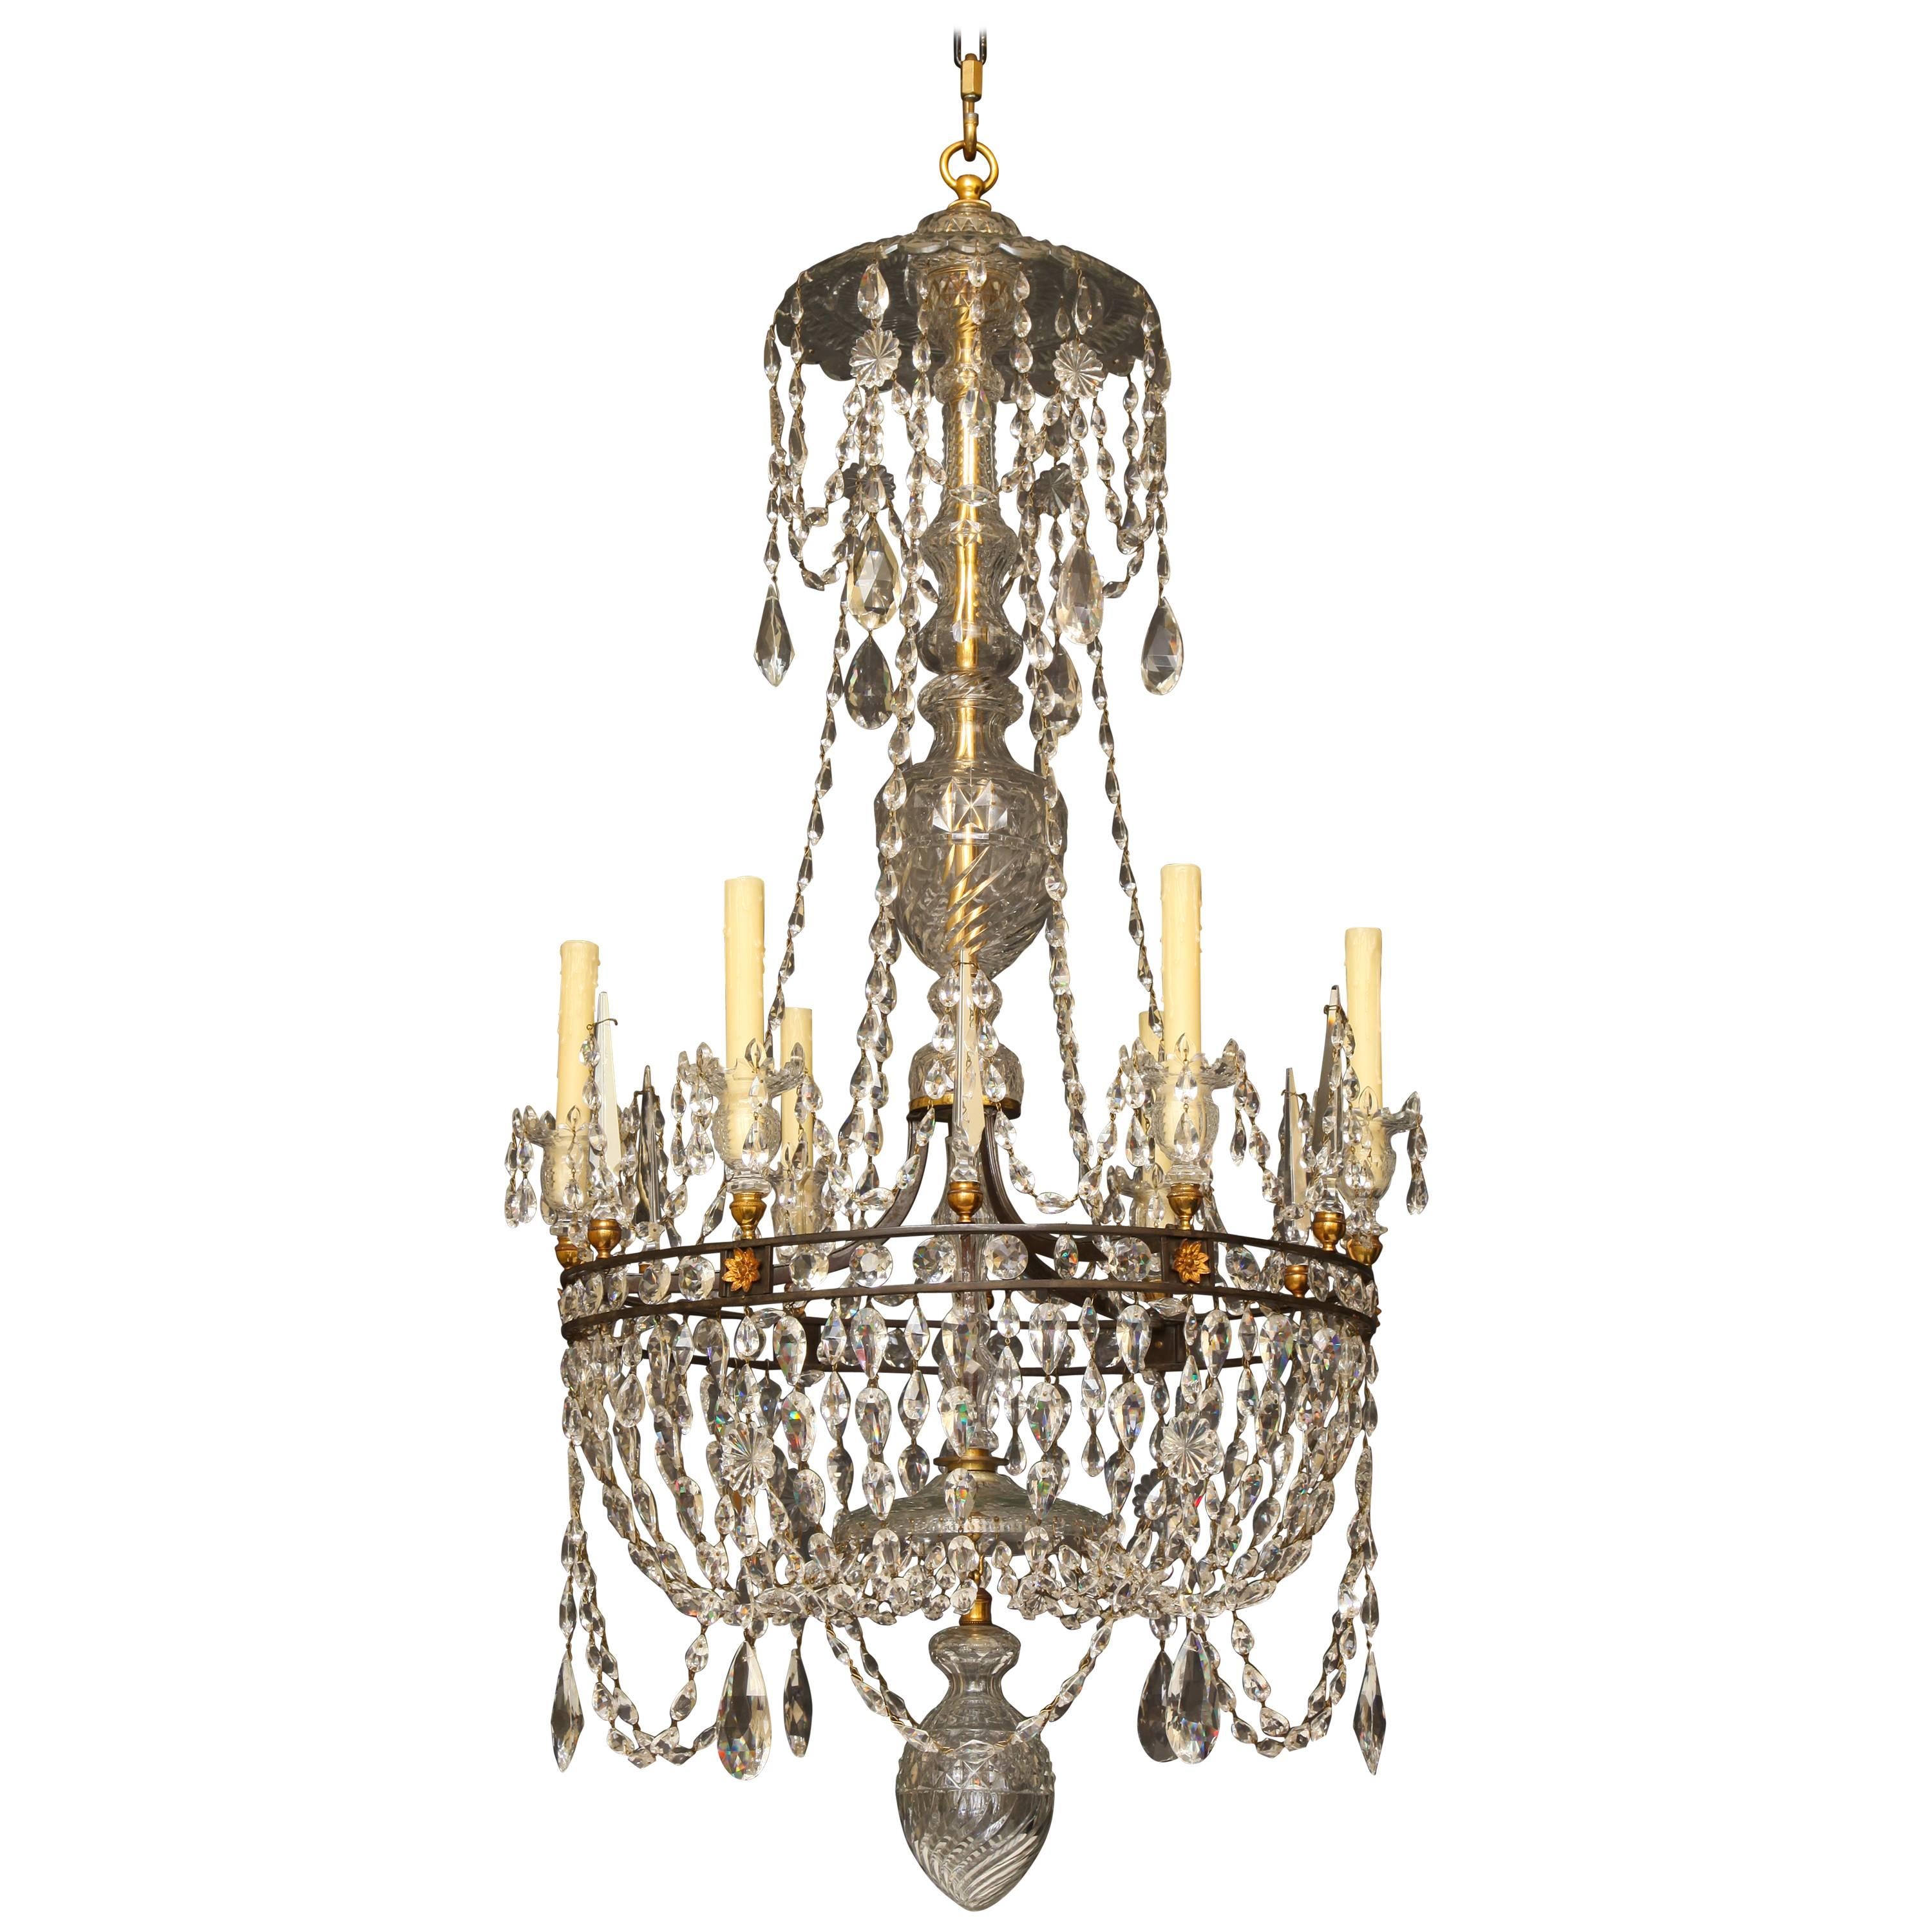 Late 18th Century-Early 19th Century Crystal Waterford Chandelier For Sale